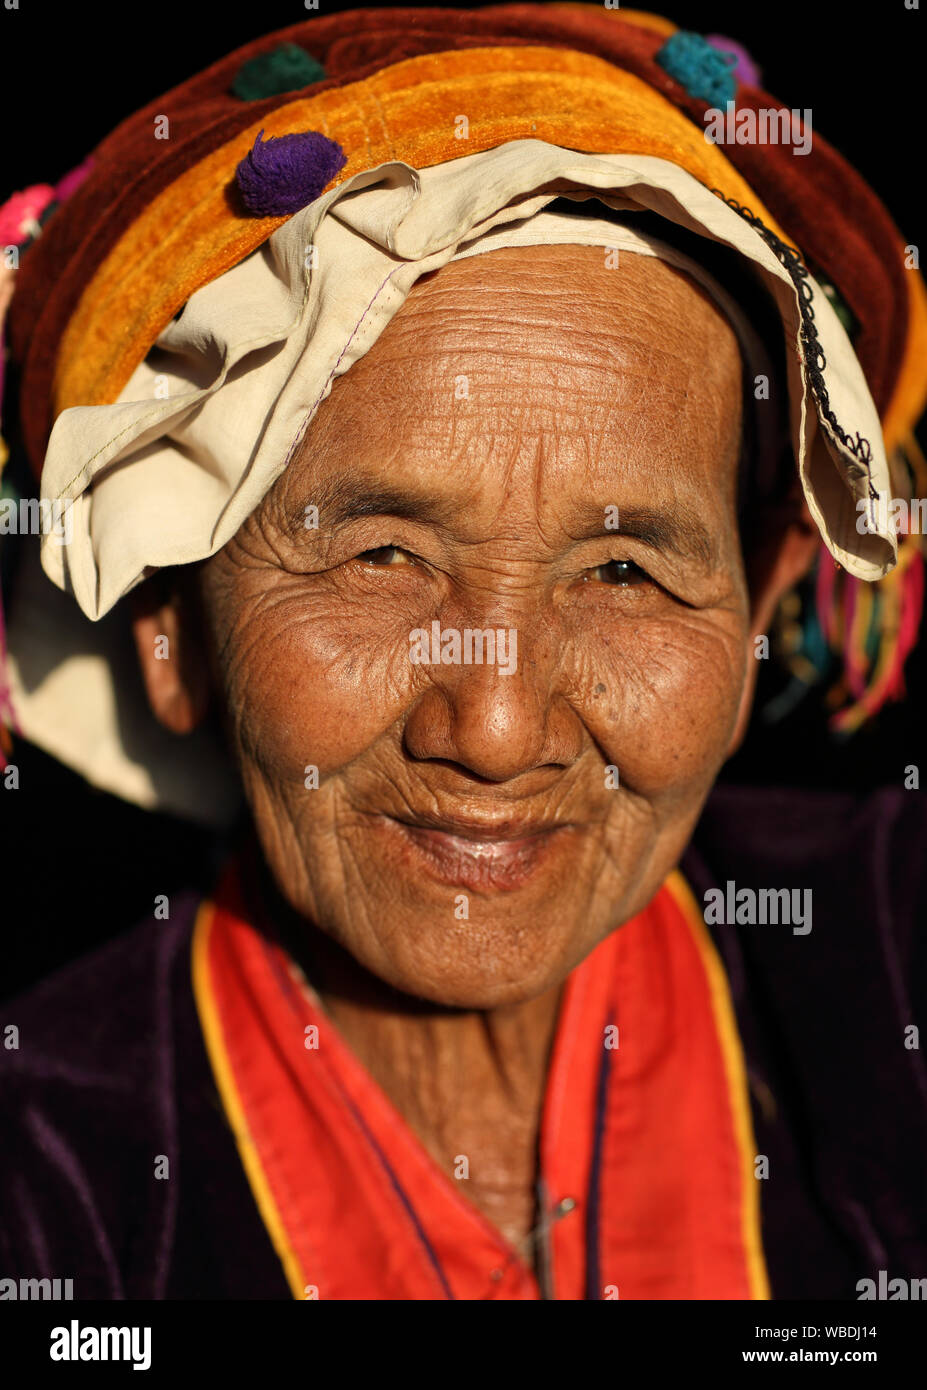 Palaung woman in a village near Hsipaw, Myanmar Stock Photo